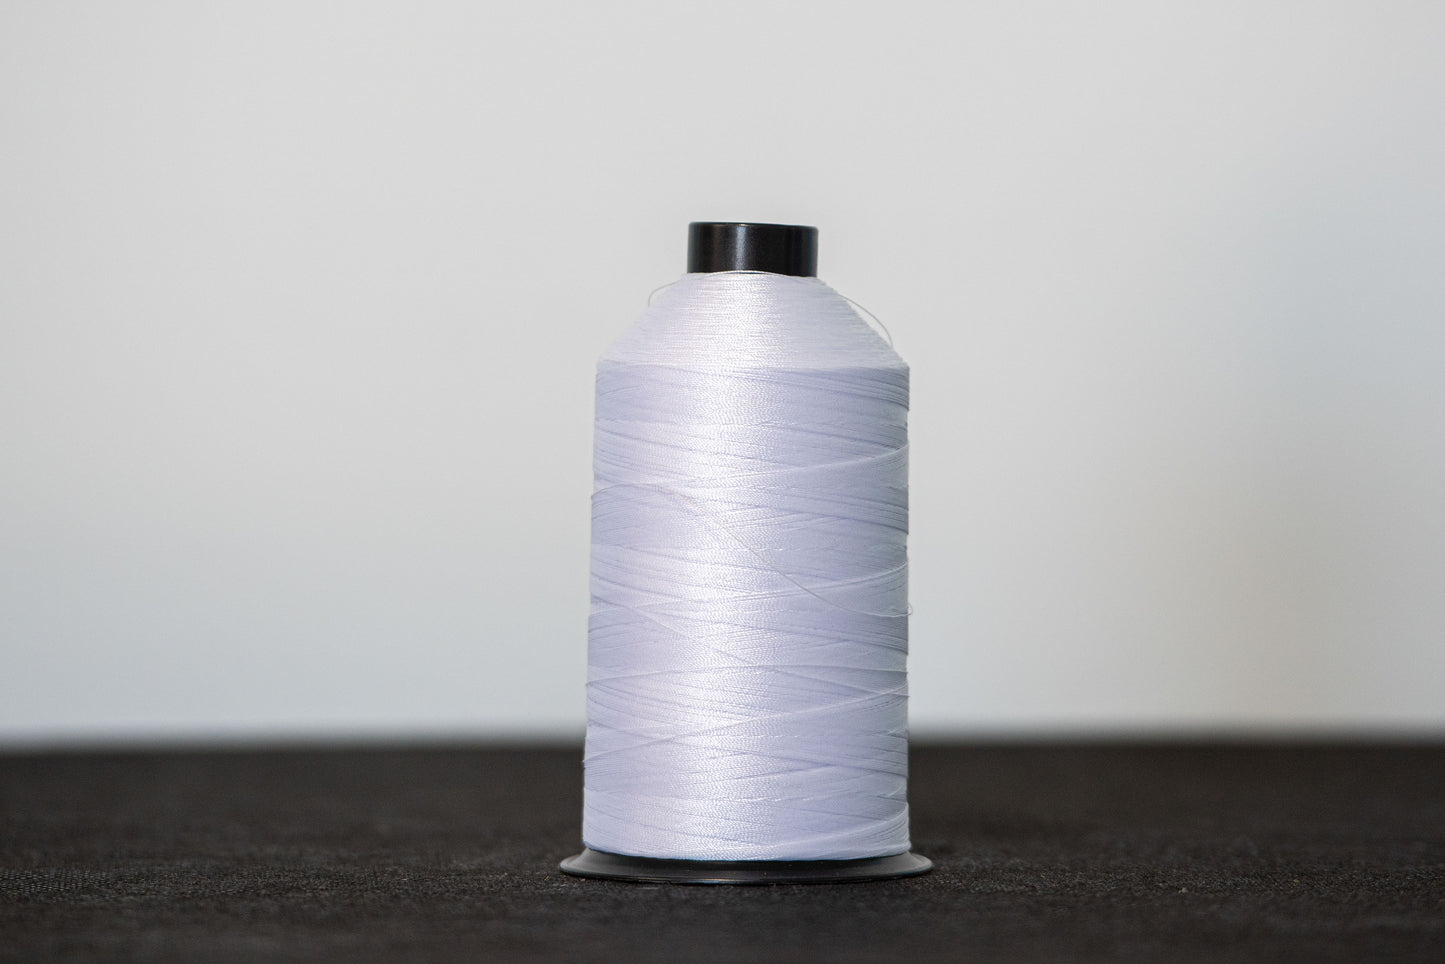 coats gral lubricated polyester thread for curtain making